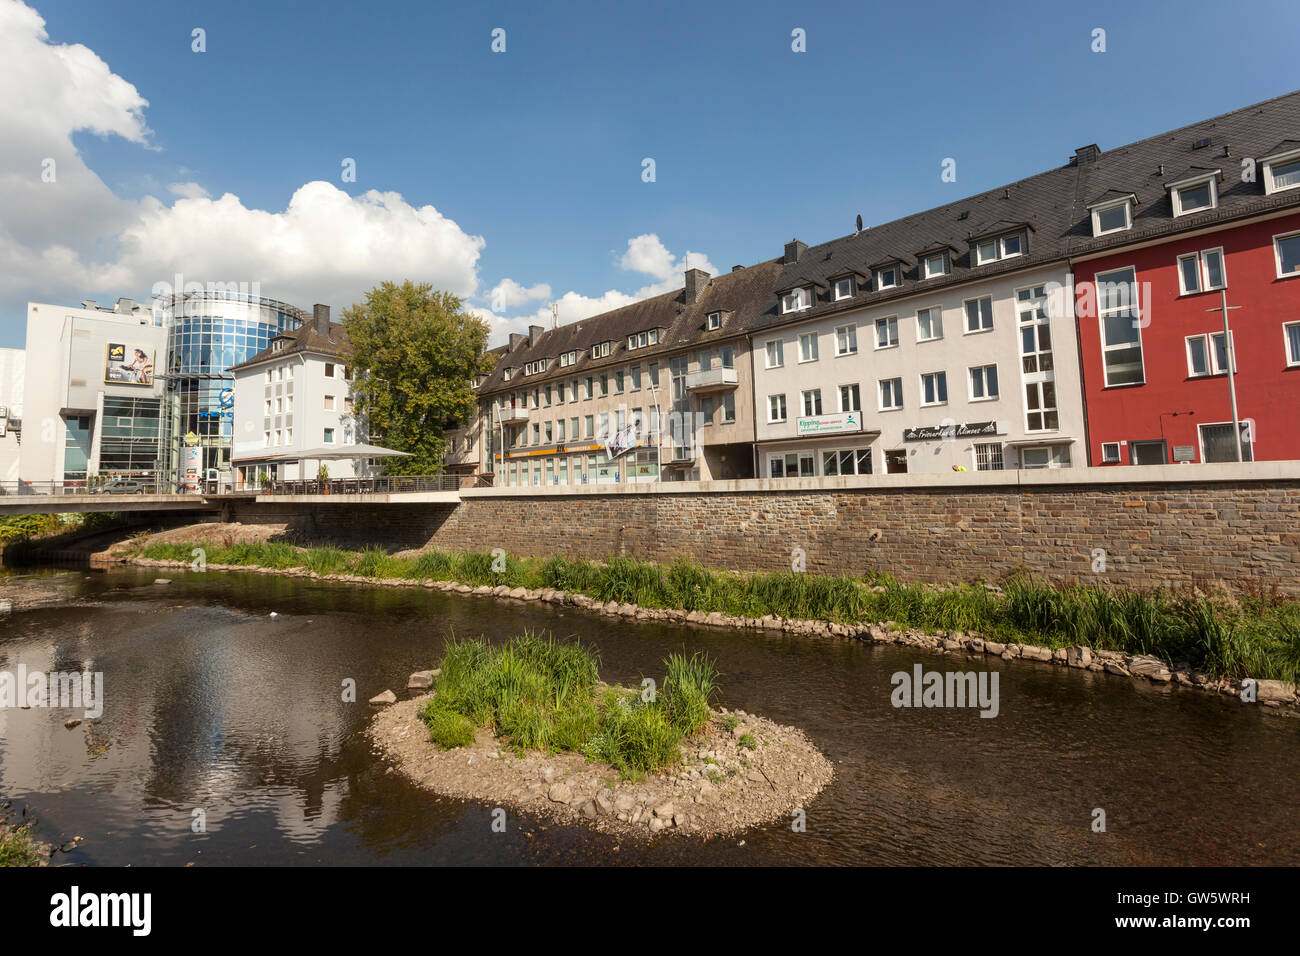 River Sieg in the city of Siegen, Germany Stock Photo